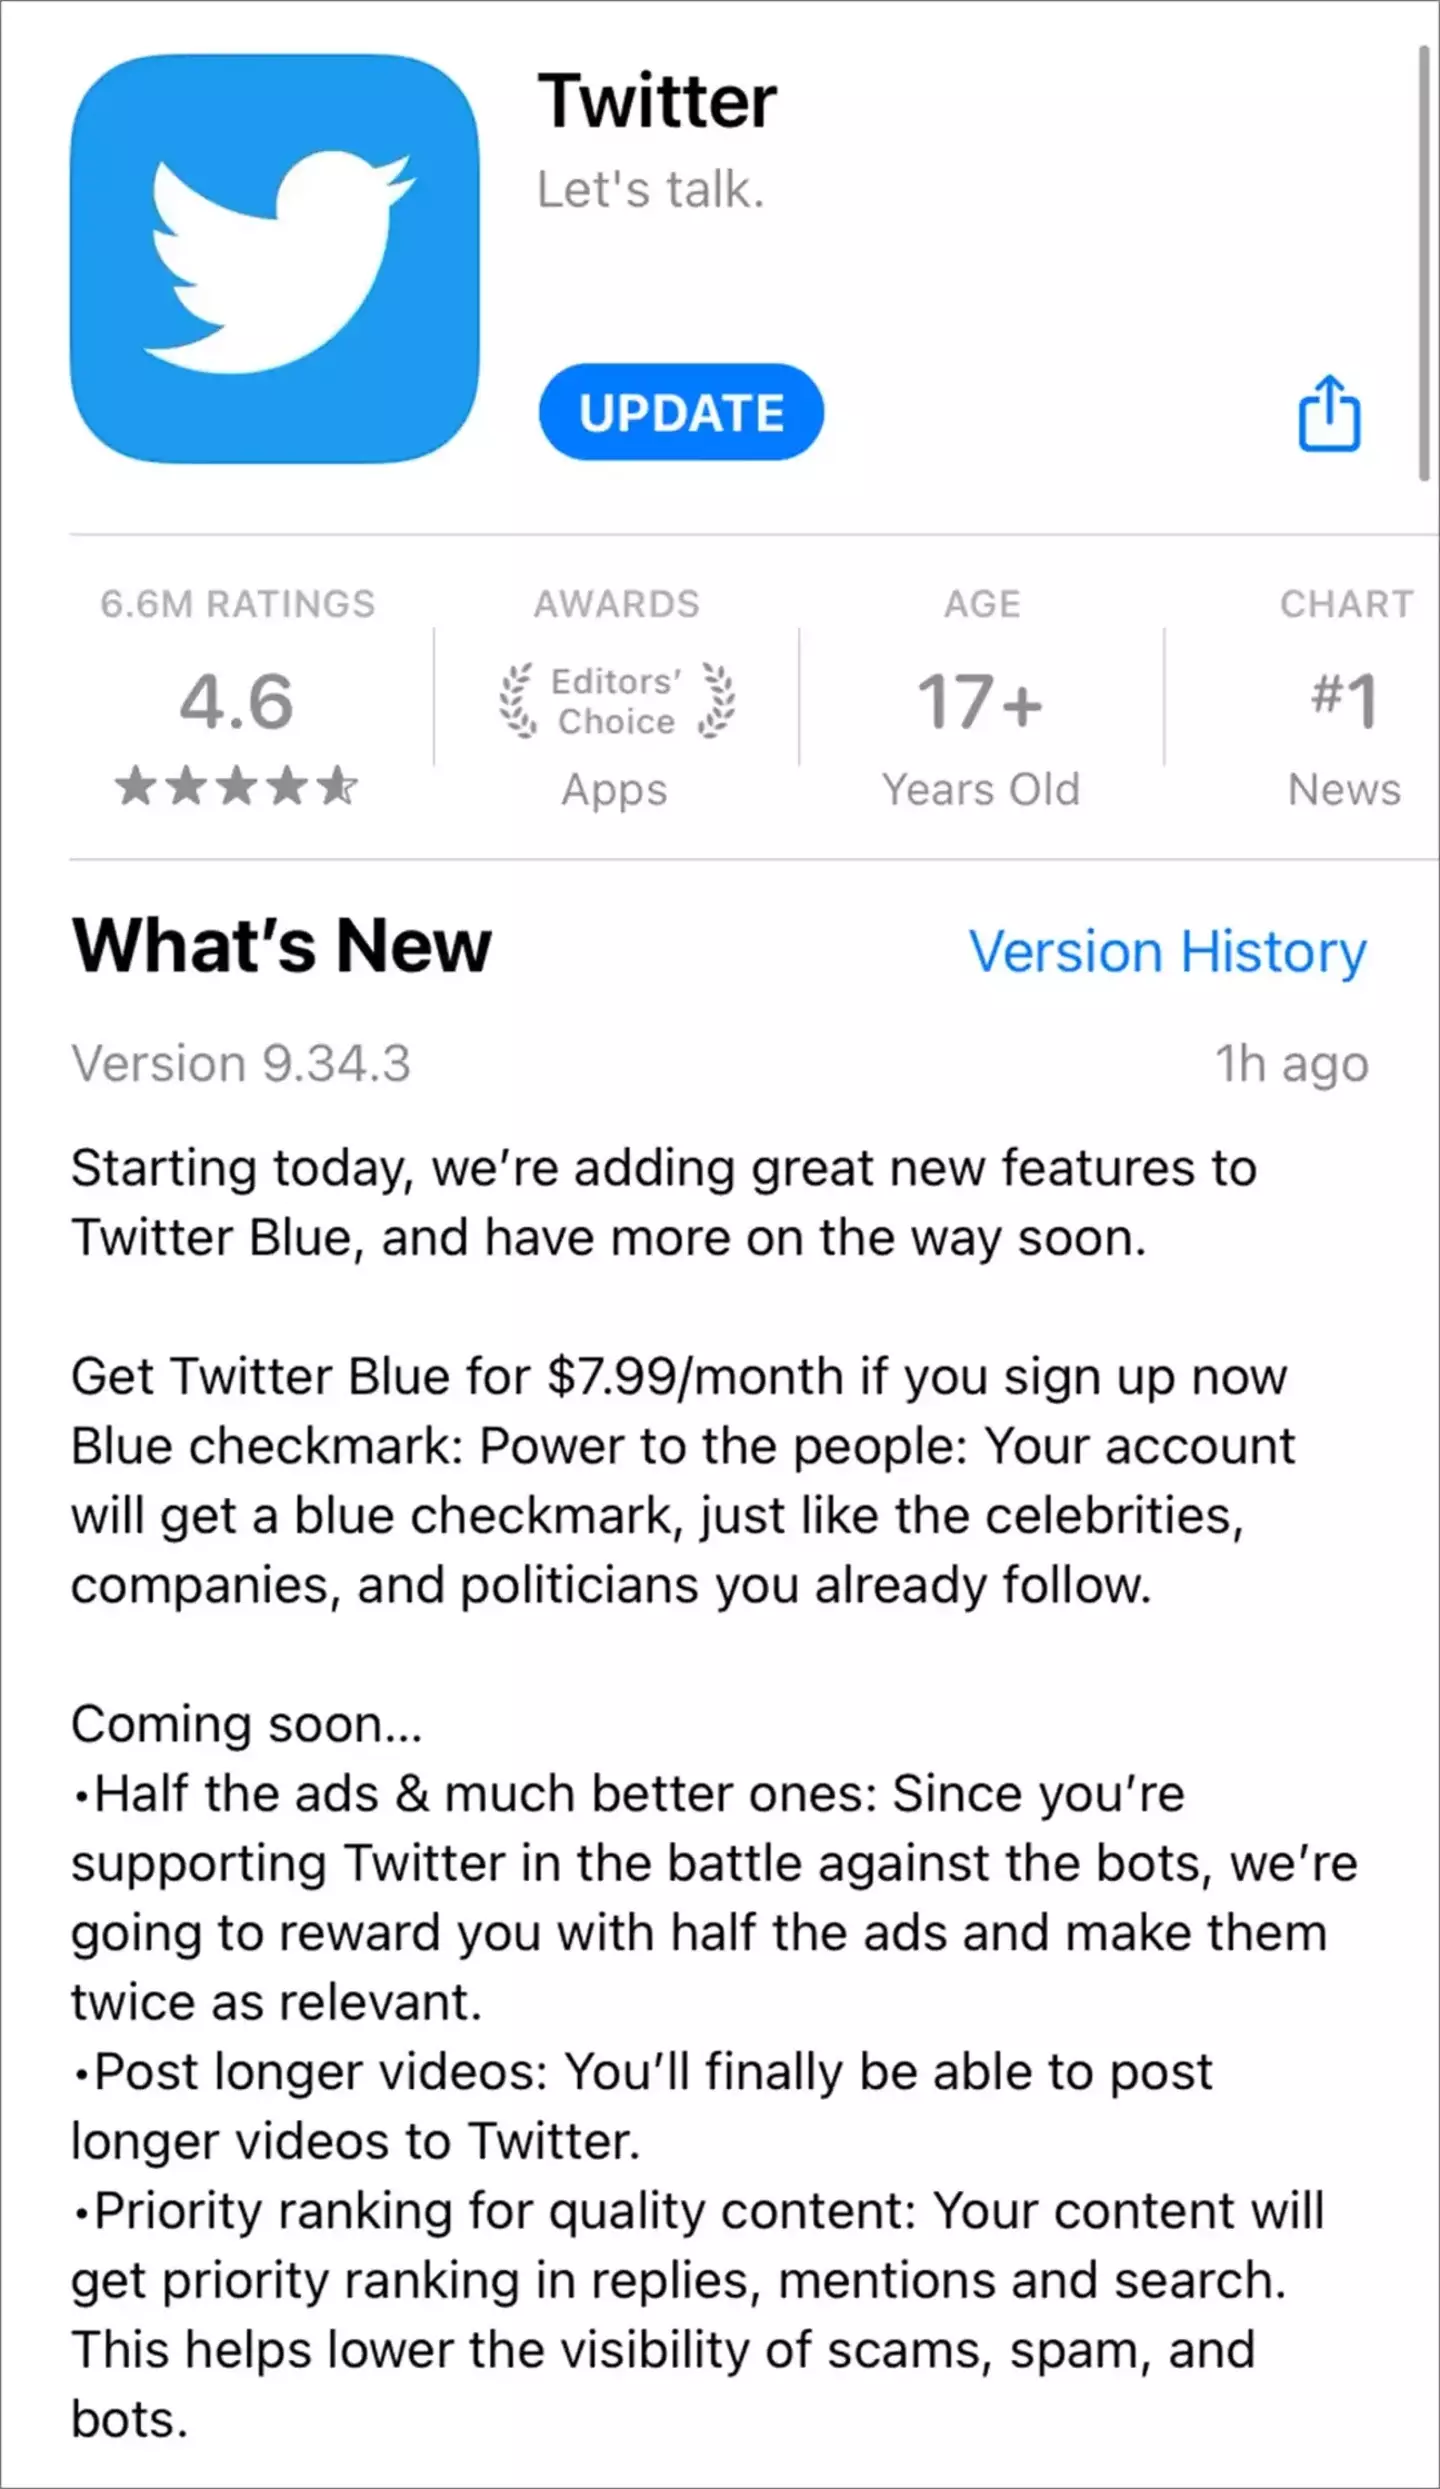 On Saturday 5 November, Elon Musk said the new features to Twitter Blue would be rolled out nationwide.